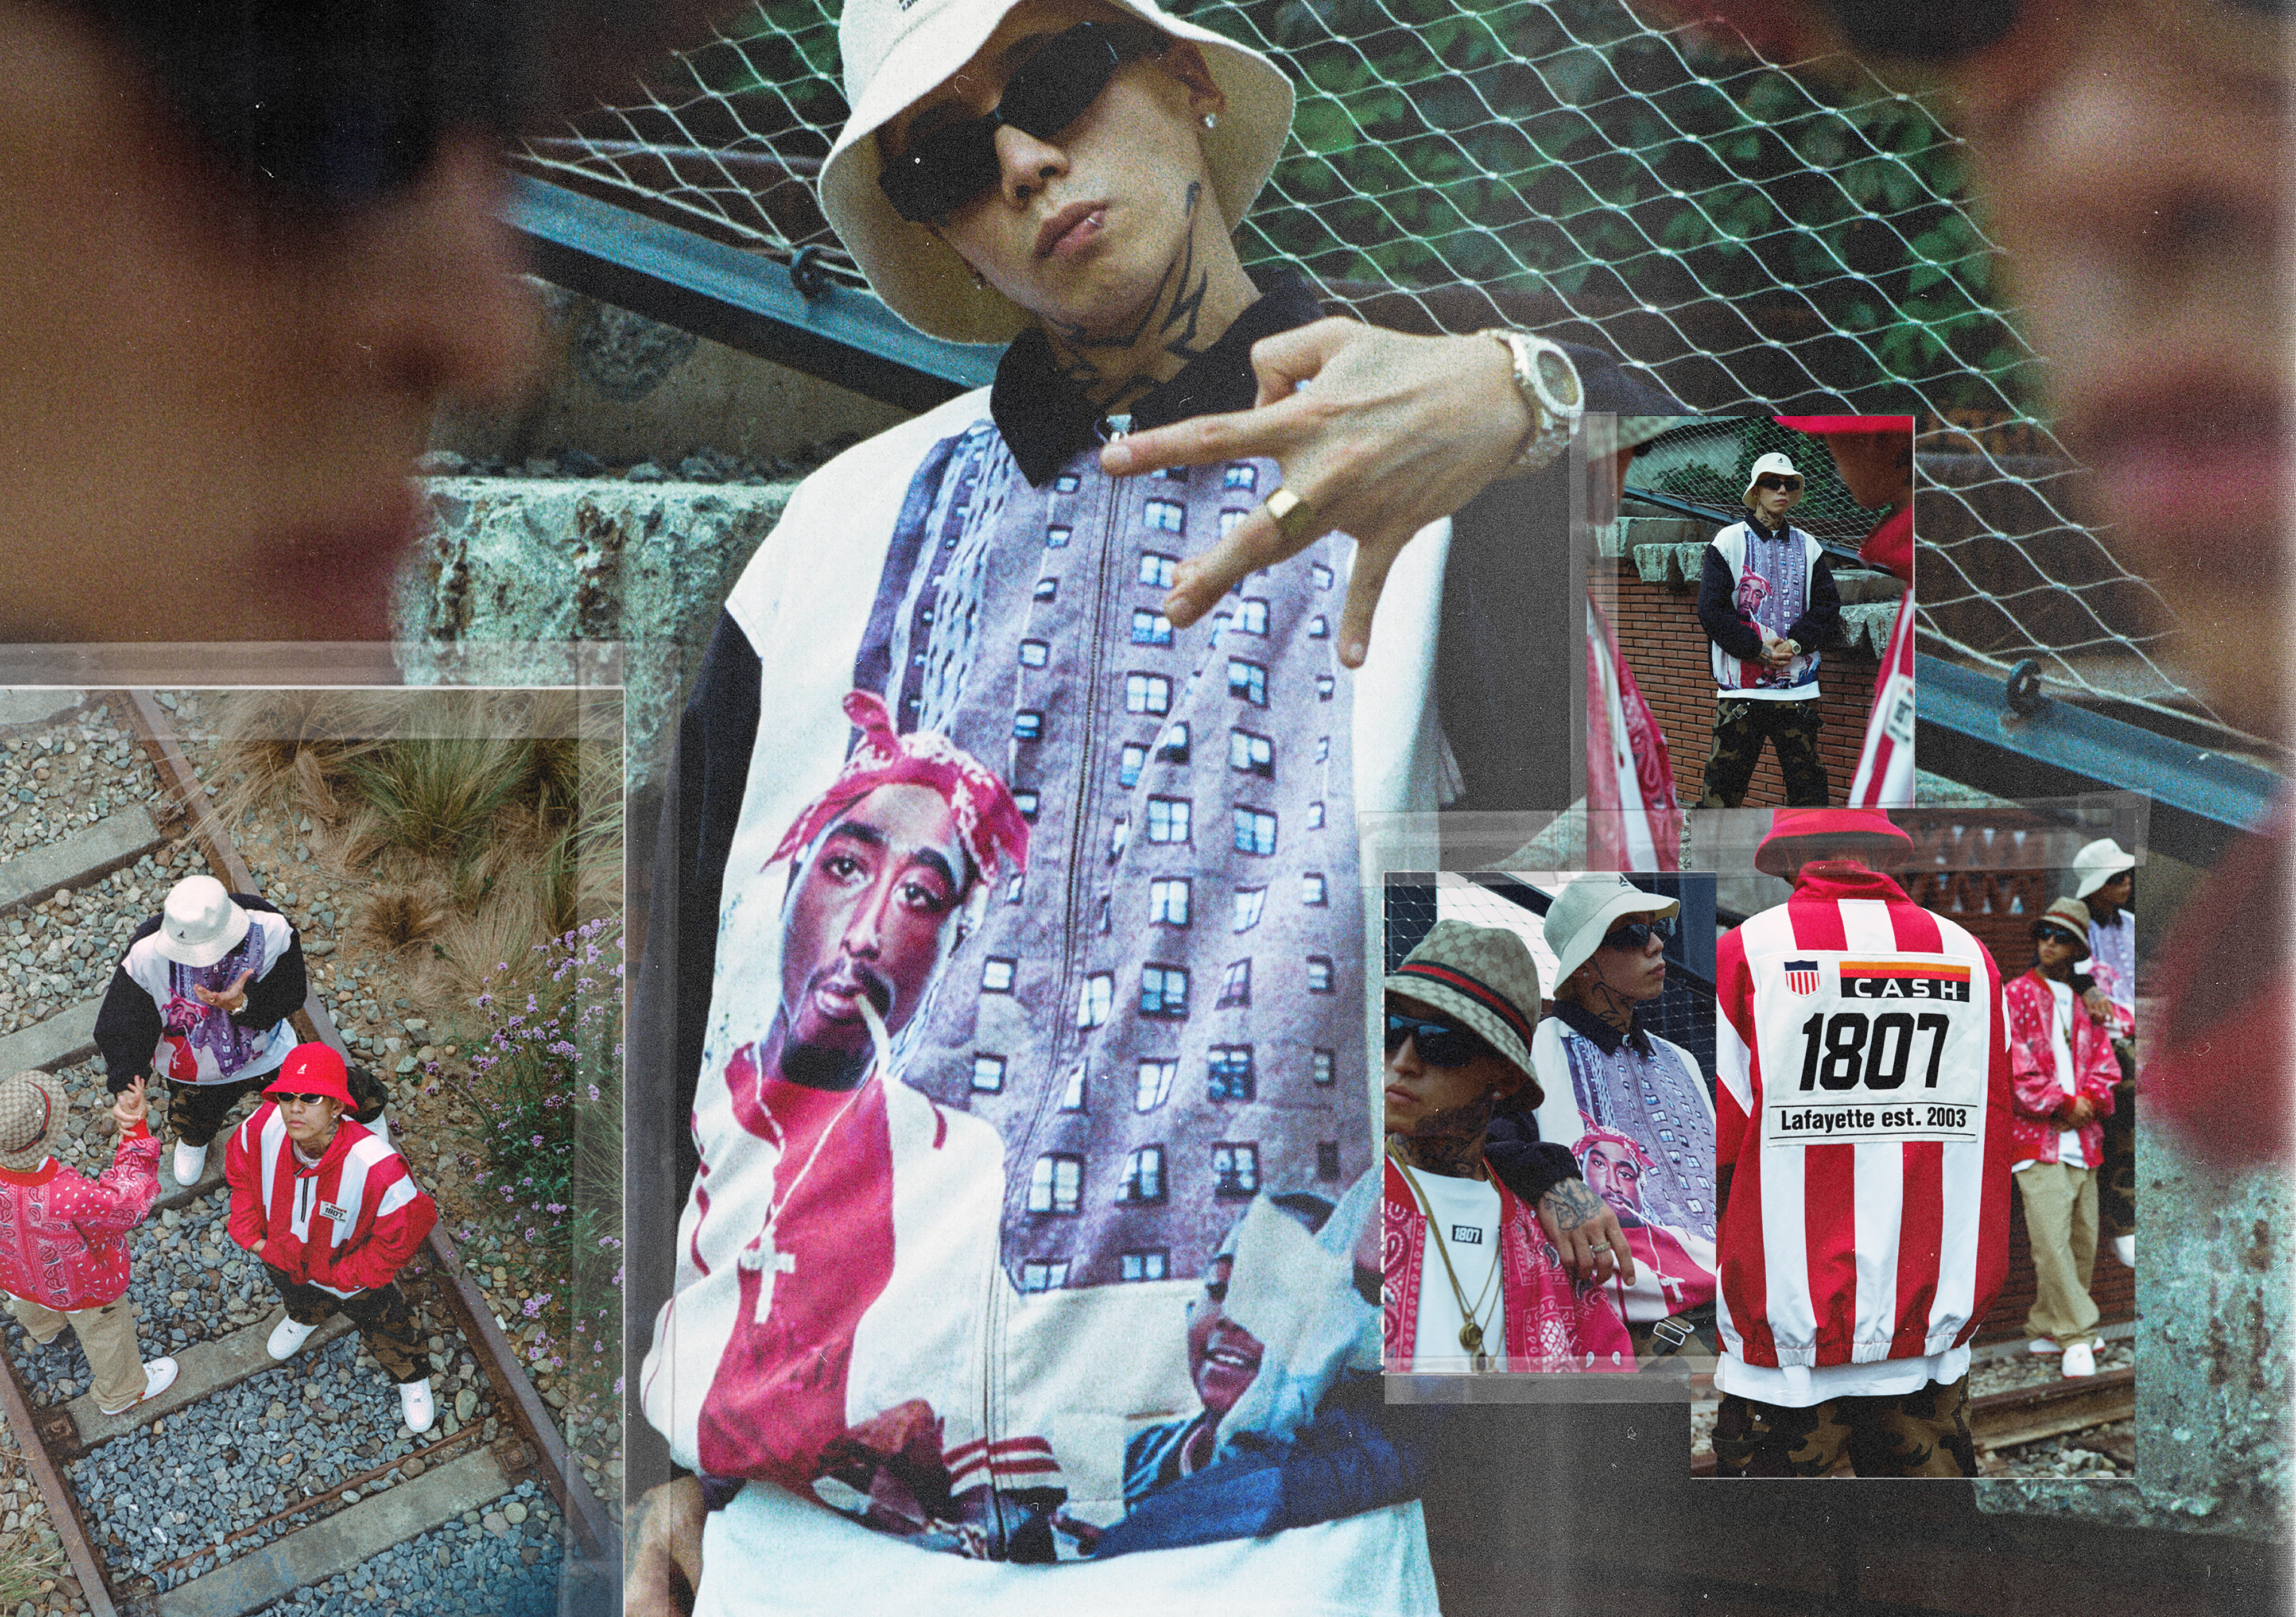 T.ERIC MONROE x LFYT x 1807 x CASH BACK TO THE 90'S Capsule 